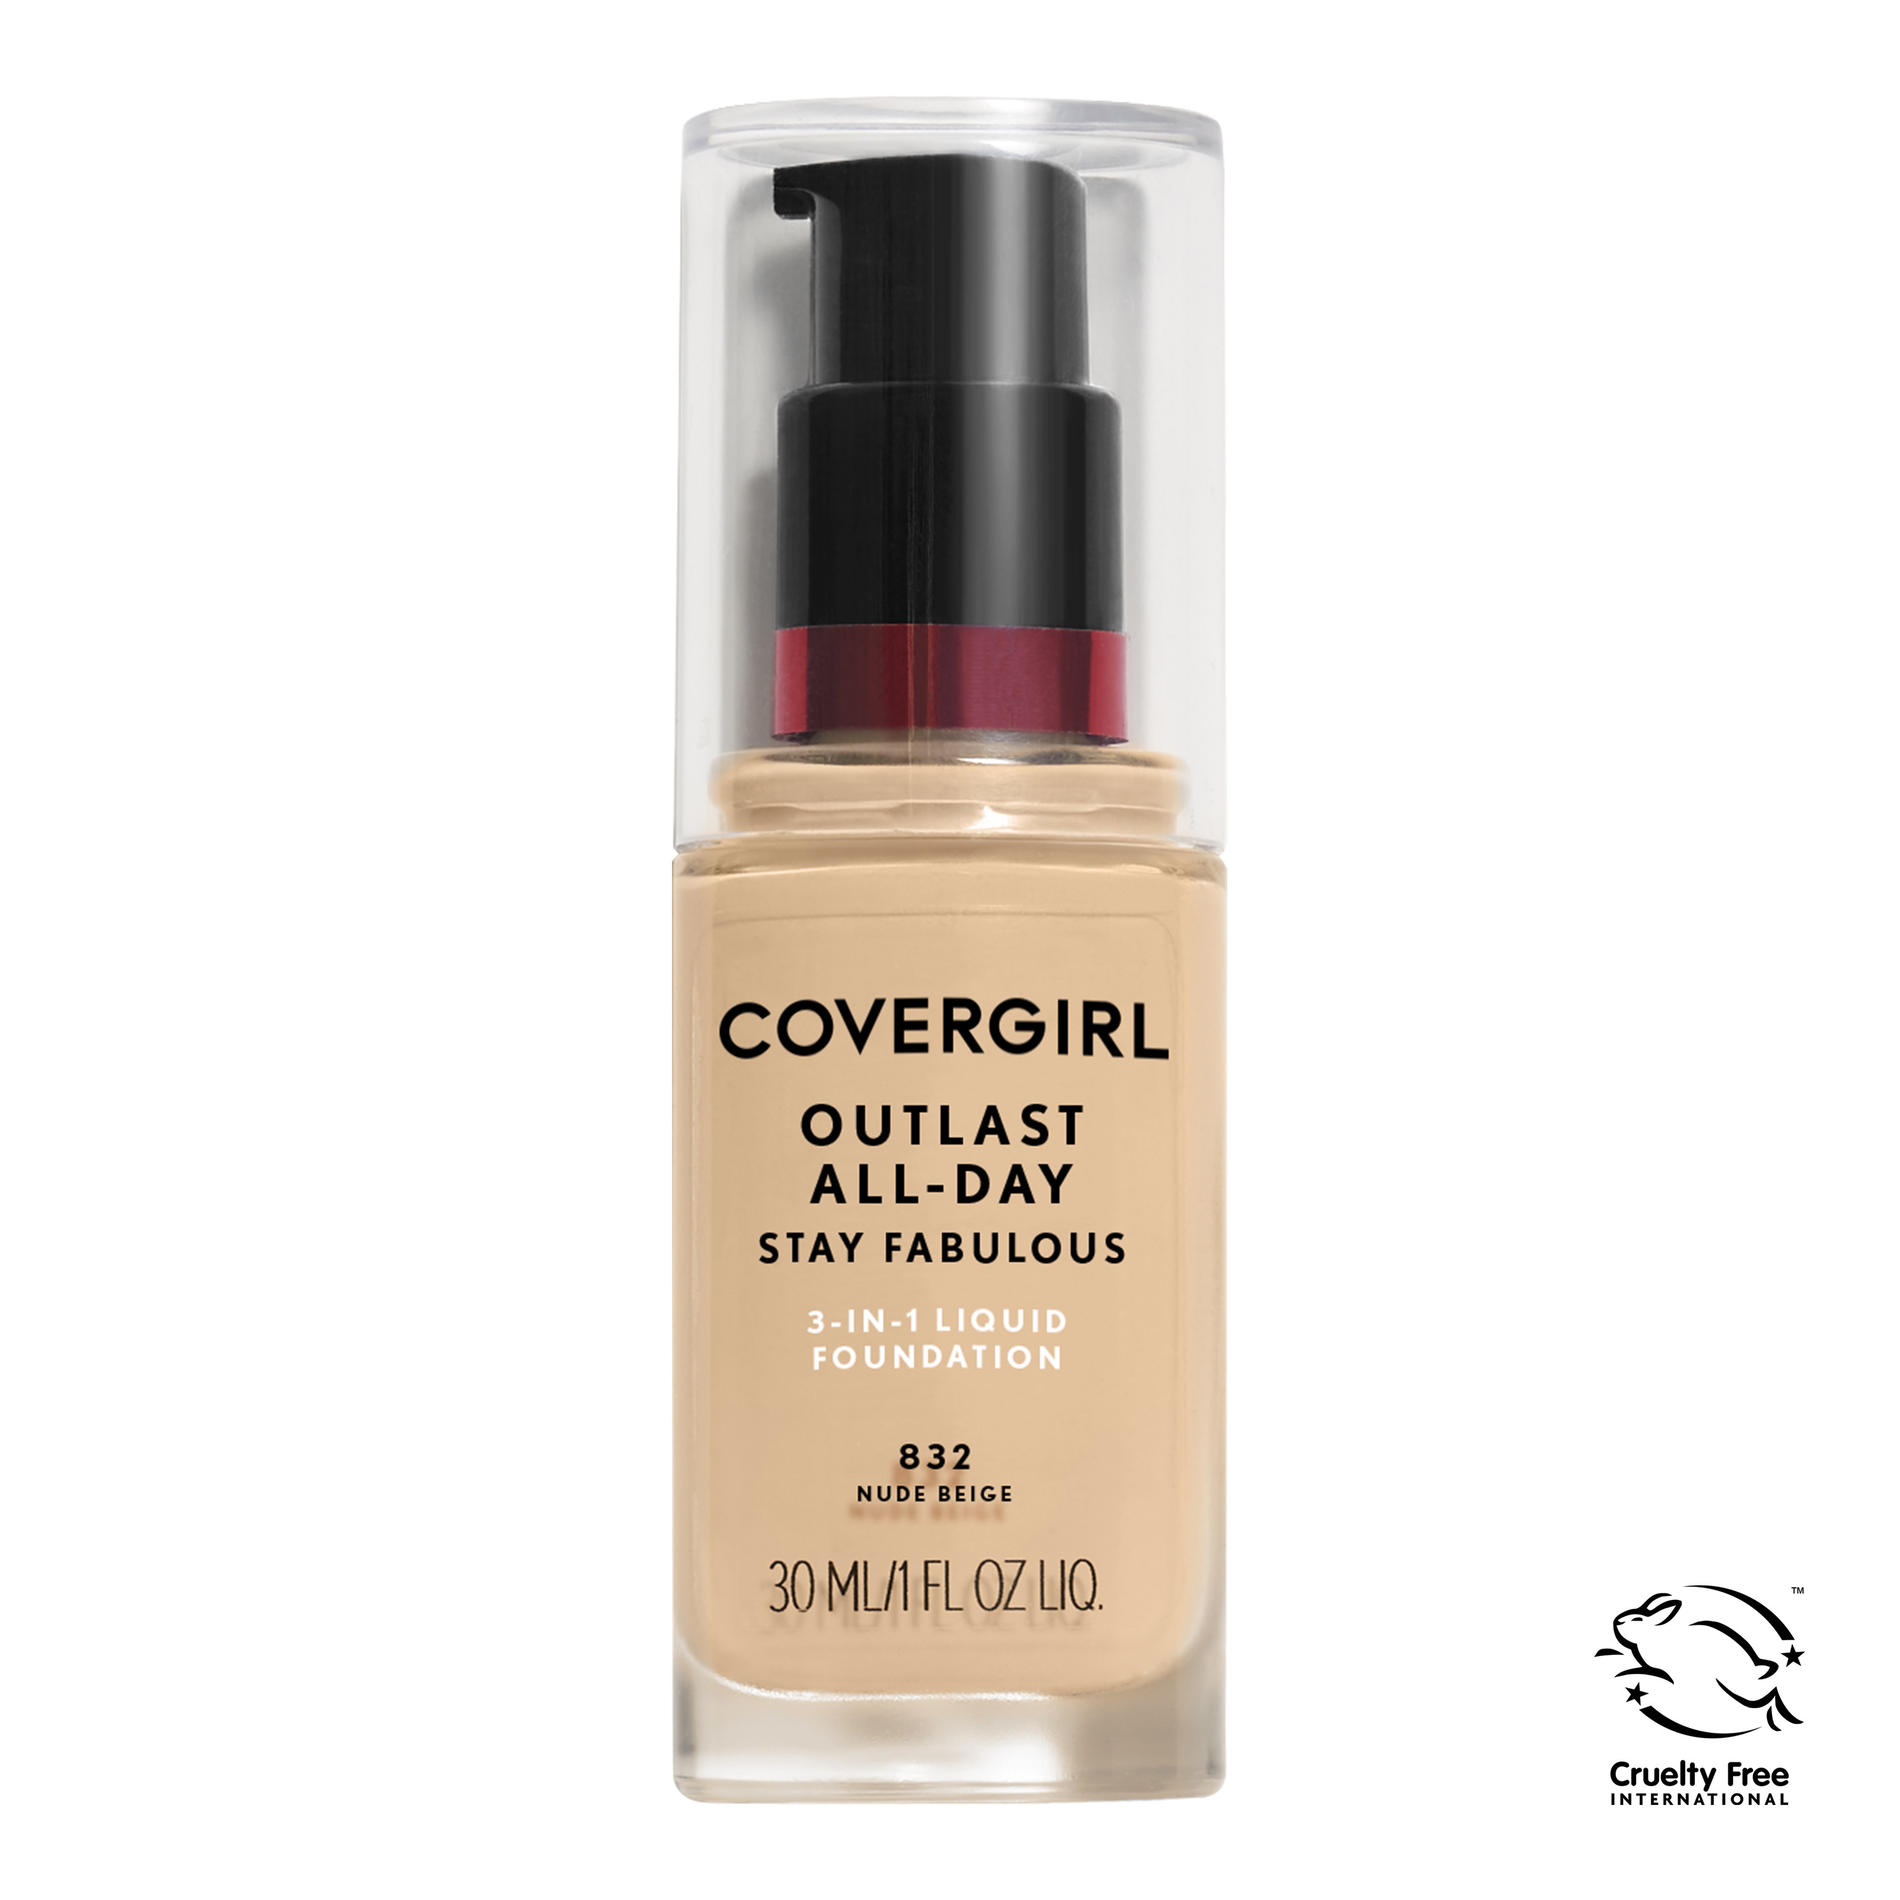 COVERGIRL Outlast All-Day Stay Fabulous 3-in-1 Foundation, 832 Nude Beige - image 1 of 3